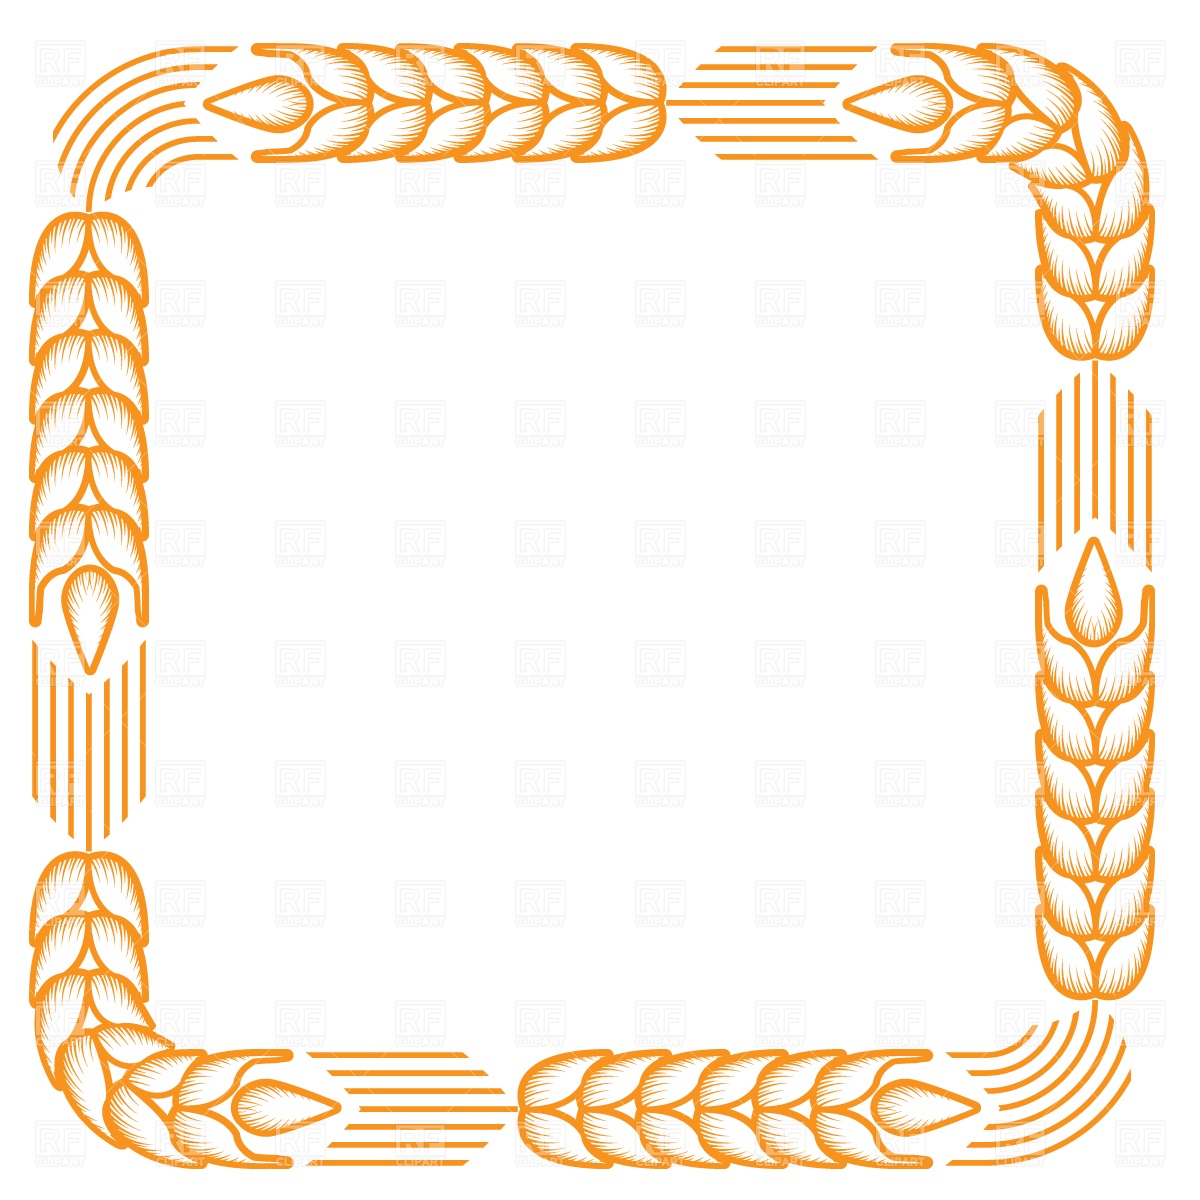 Wheat Border Clipart Images   Pictures   Becuo